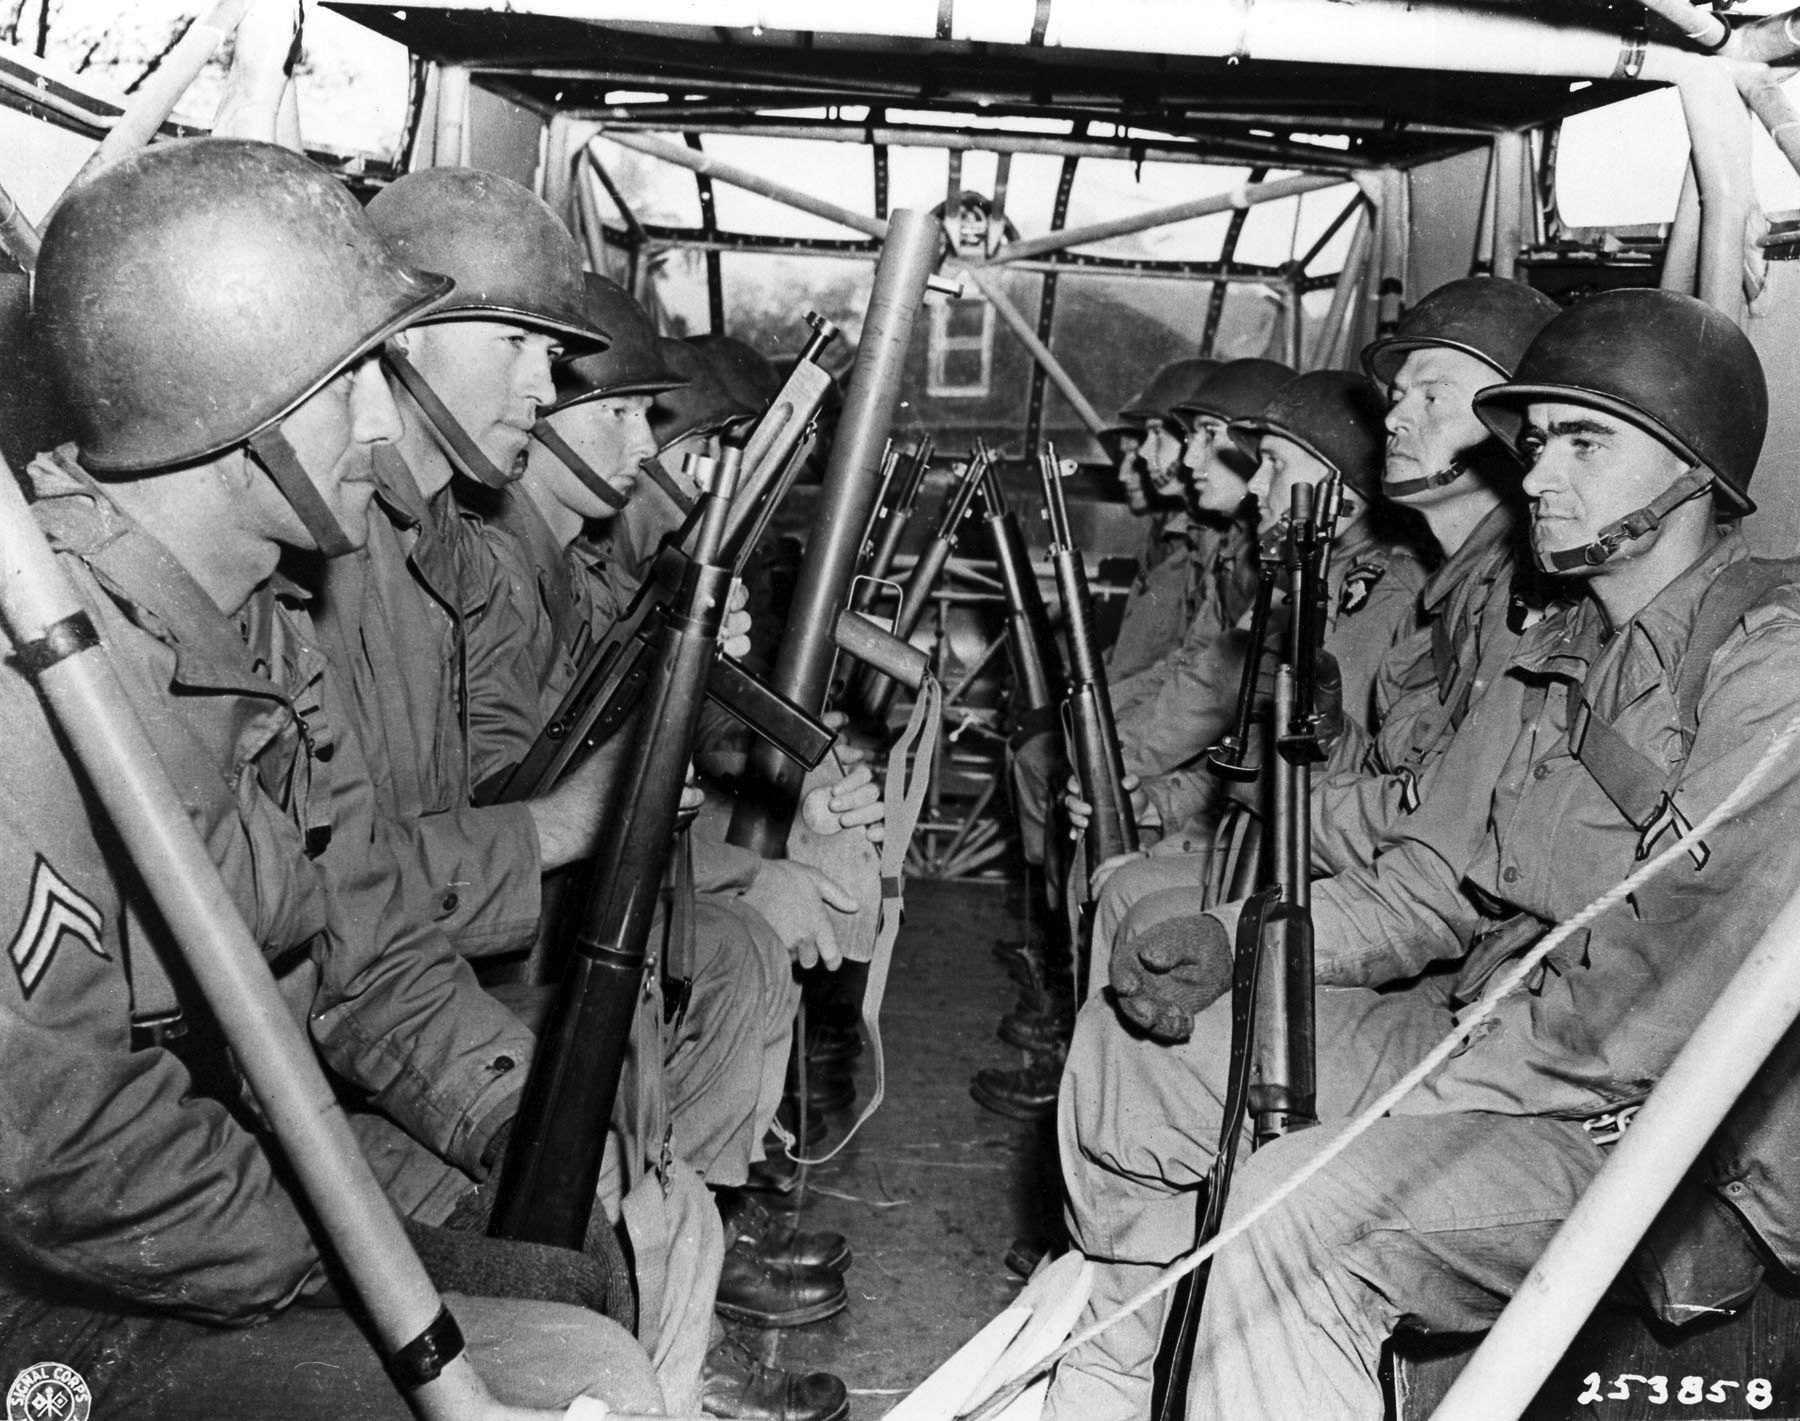 A number of 101st Airborne Division paratroopers sit aboard their Waco glider in early 1944. These troopers carry a variety of weapons, including the Browning Automatic Rifle (BAR), bazooka, Thompson submachine gun, and the M1903 rifle visible in the foreground at left.